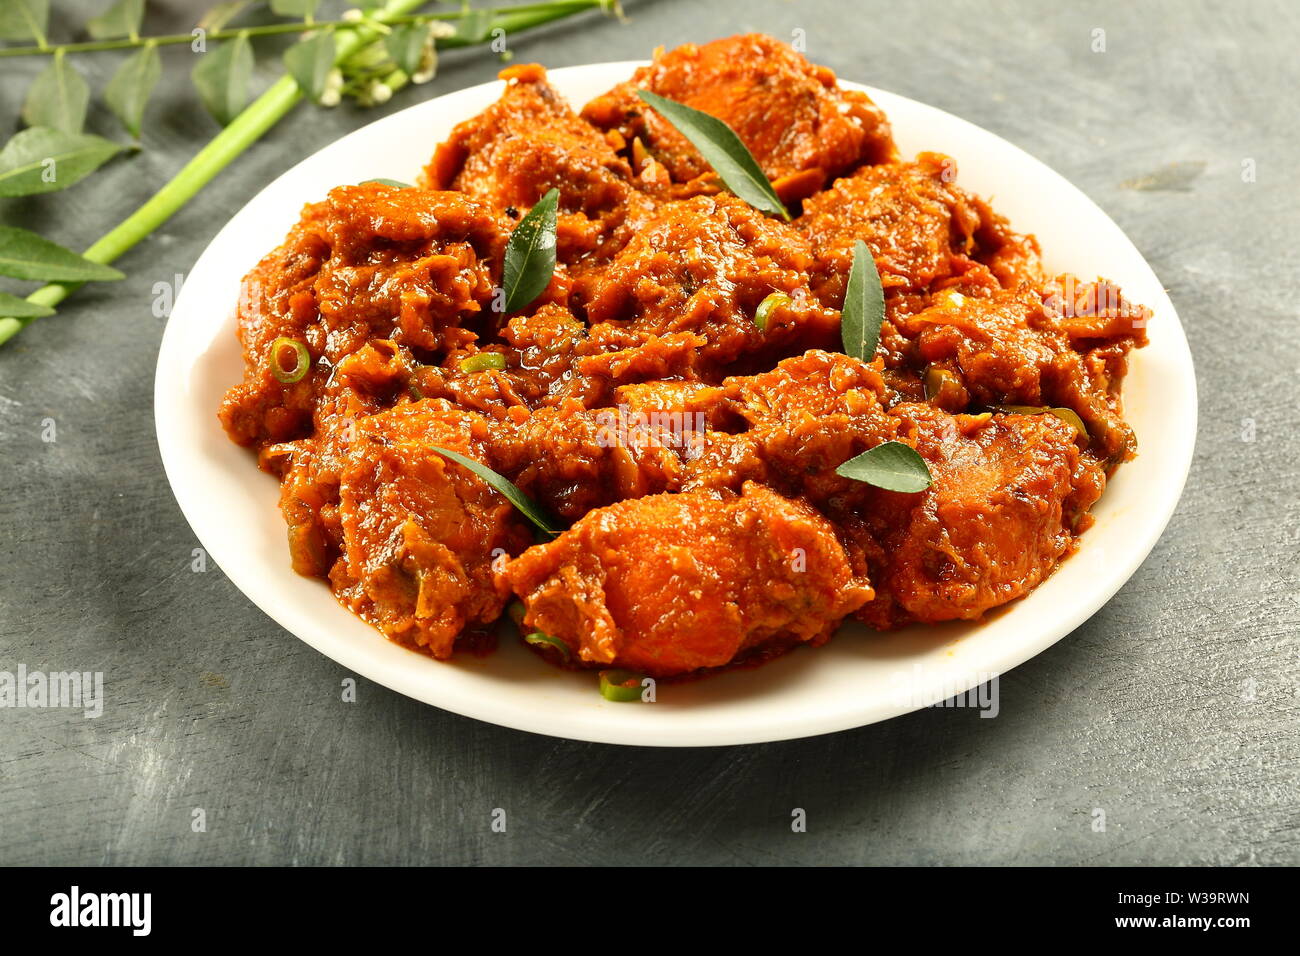 Homemade chicken curry from Indian recipes. Stock Photo